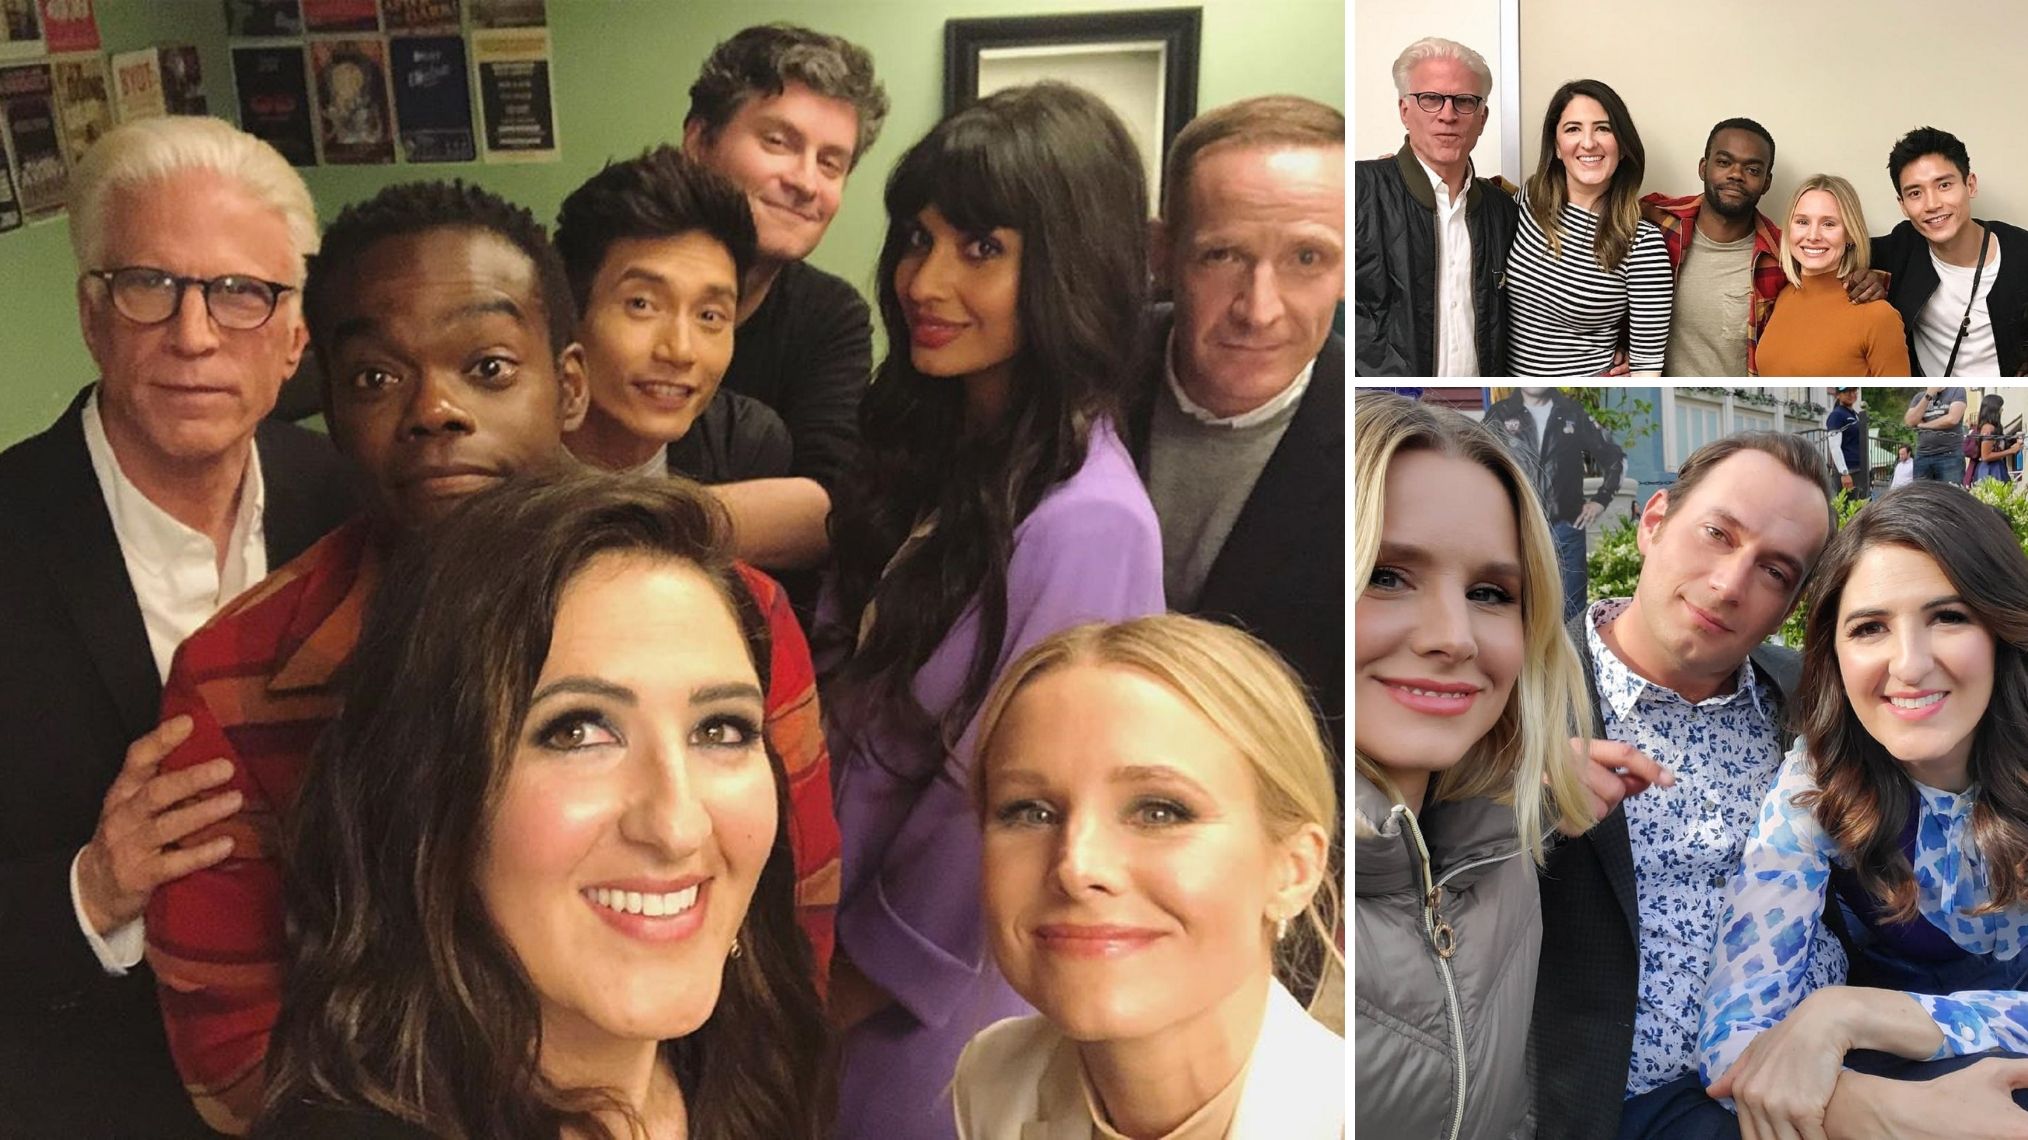 Behind the Scenes of the Final Season With the Cast (PHOTOS) – TV Insider ...2028 x 1140